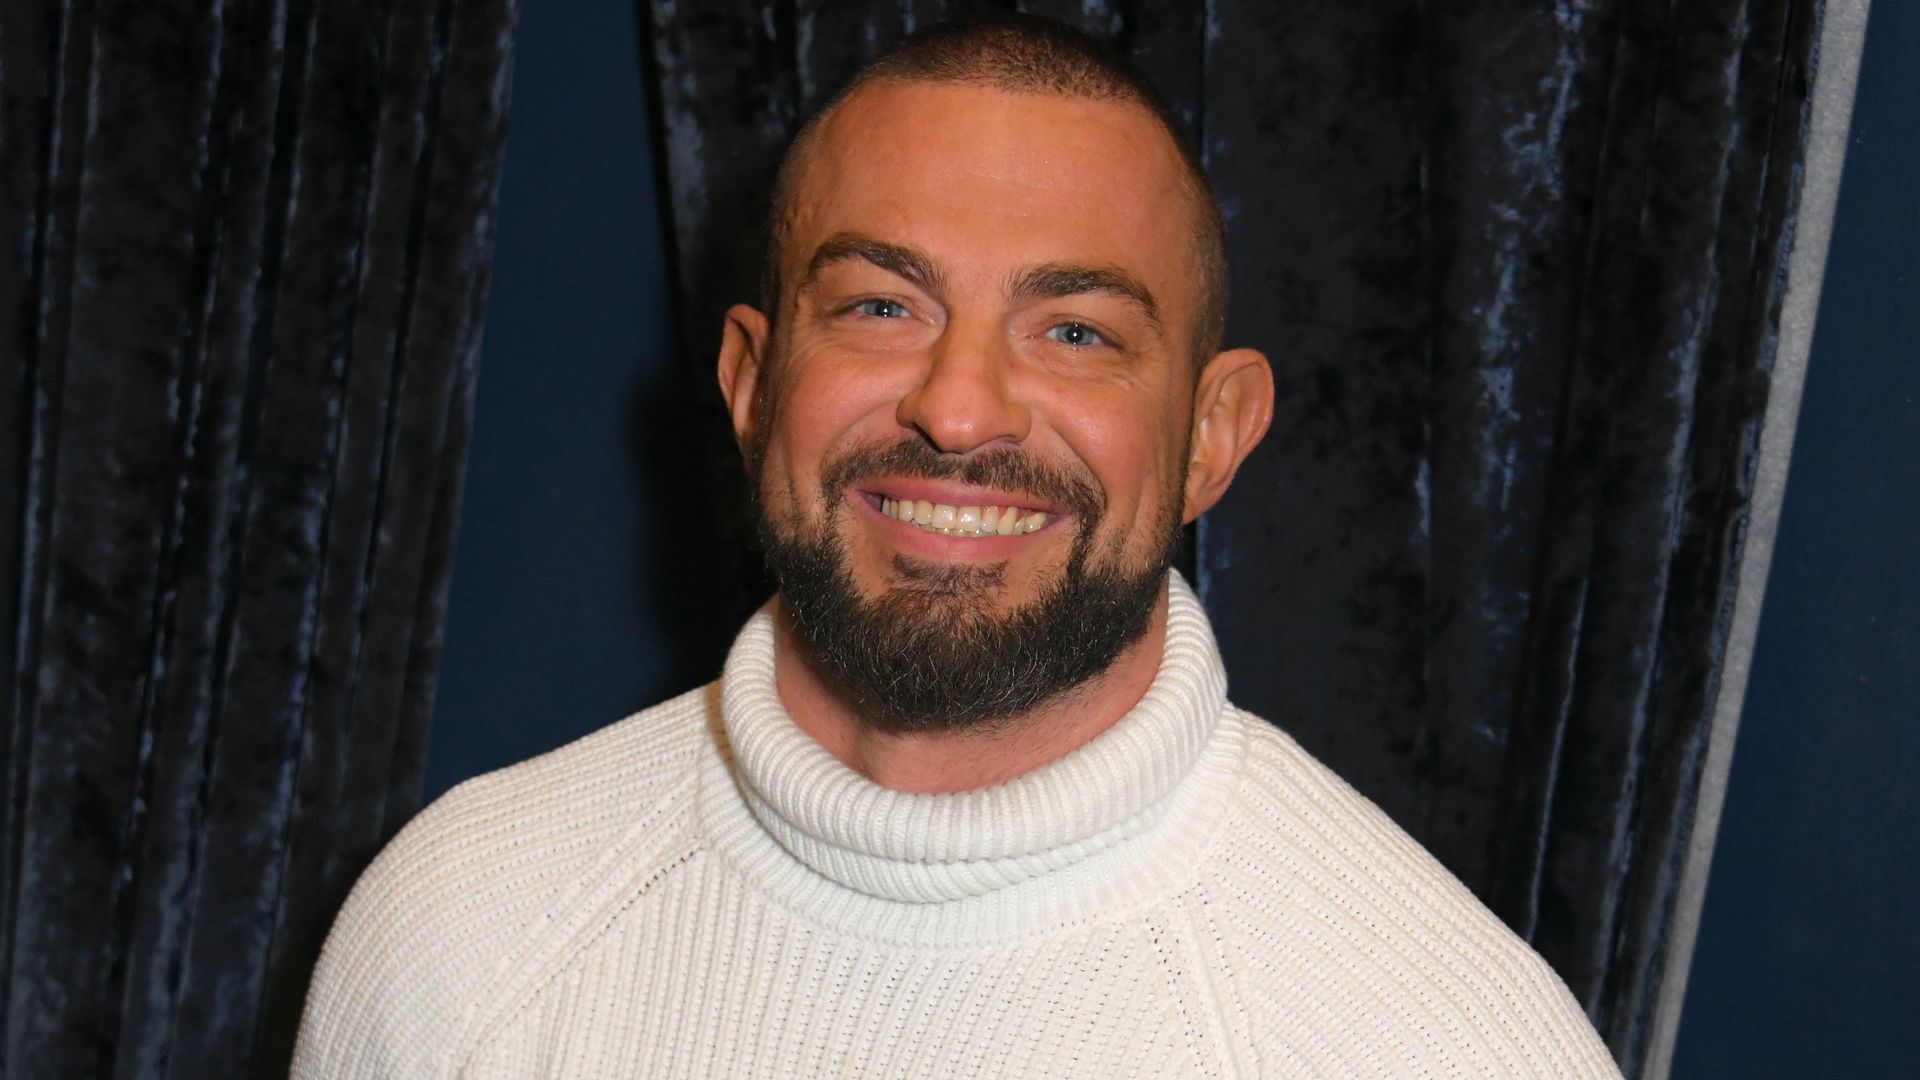 Robin Windsor attends the press night after party for "Rip It Up" at Cafe de Paris 